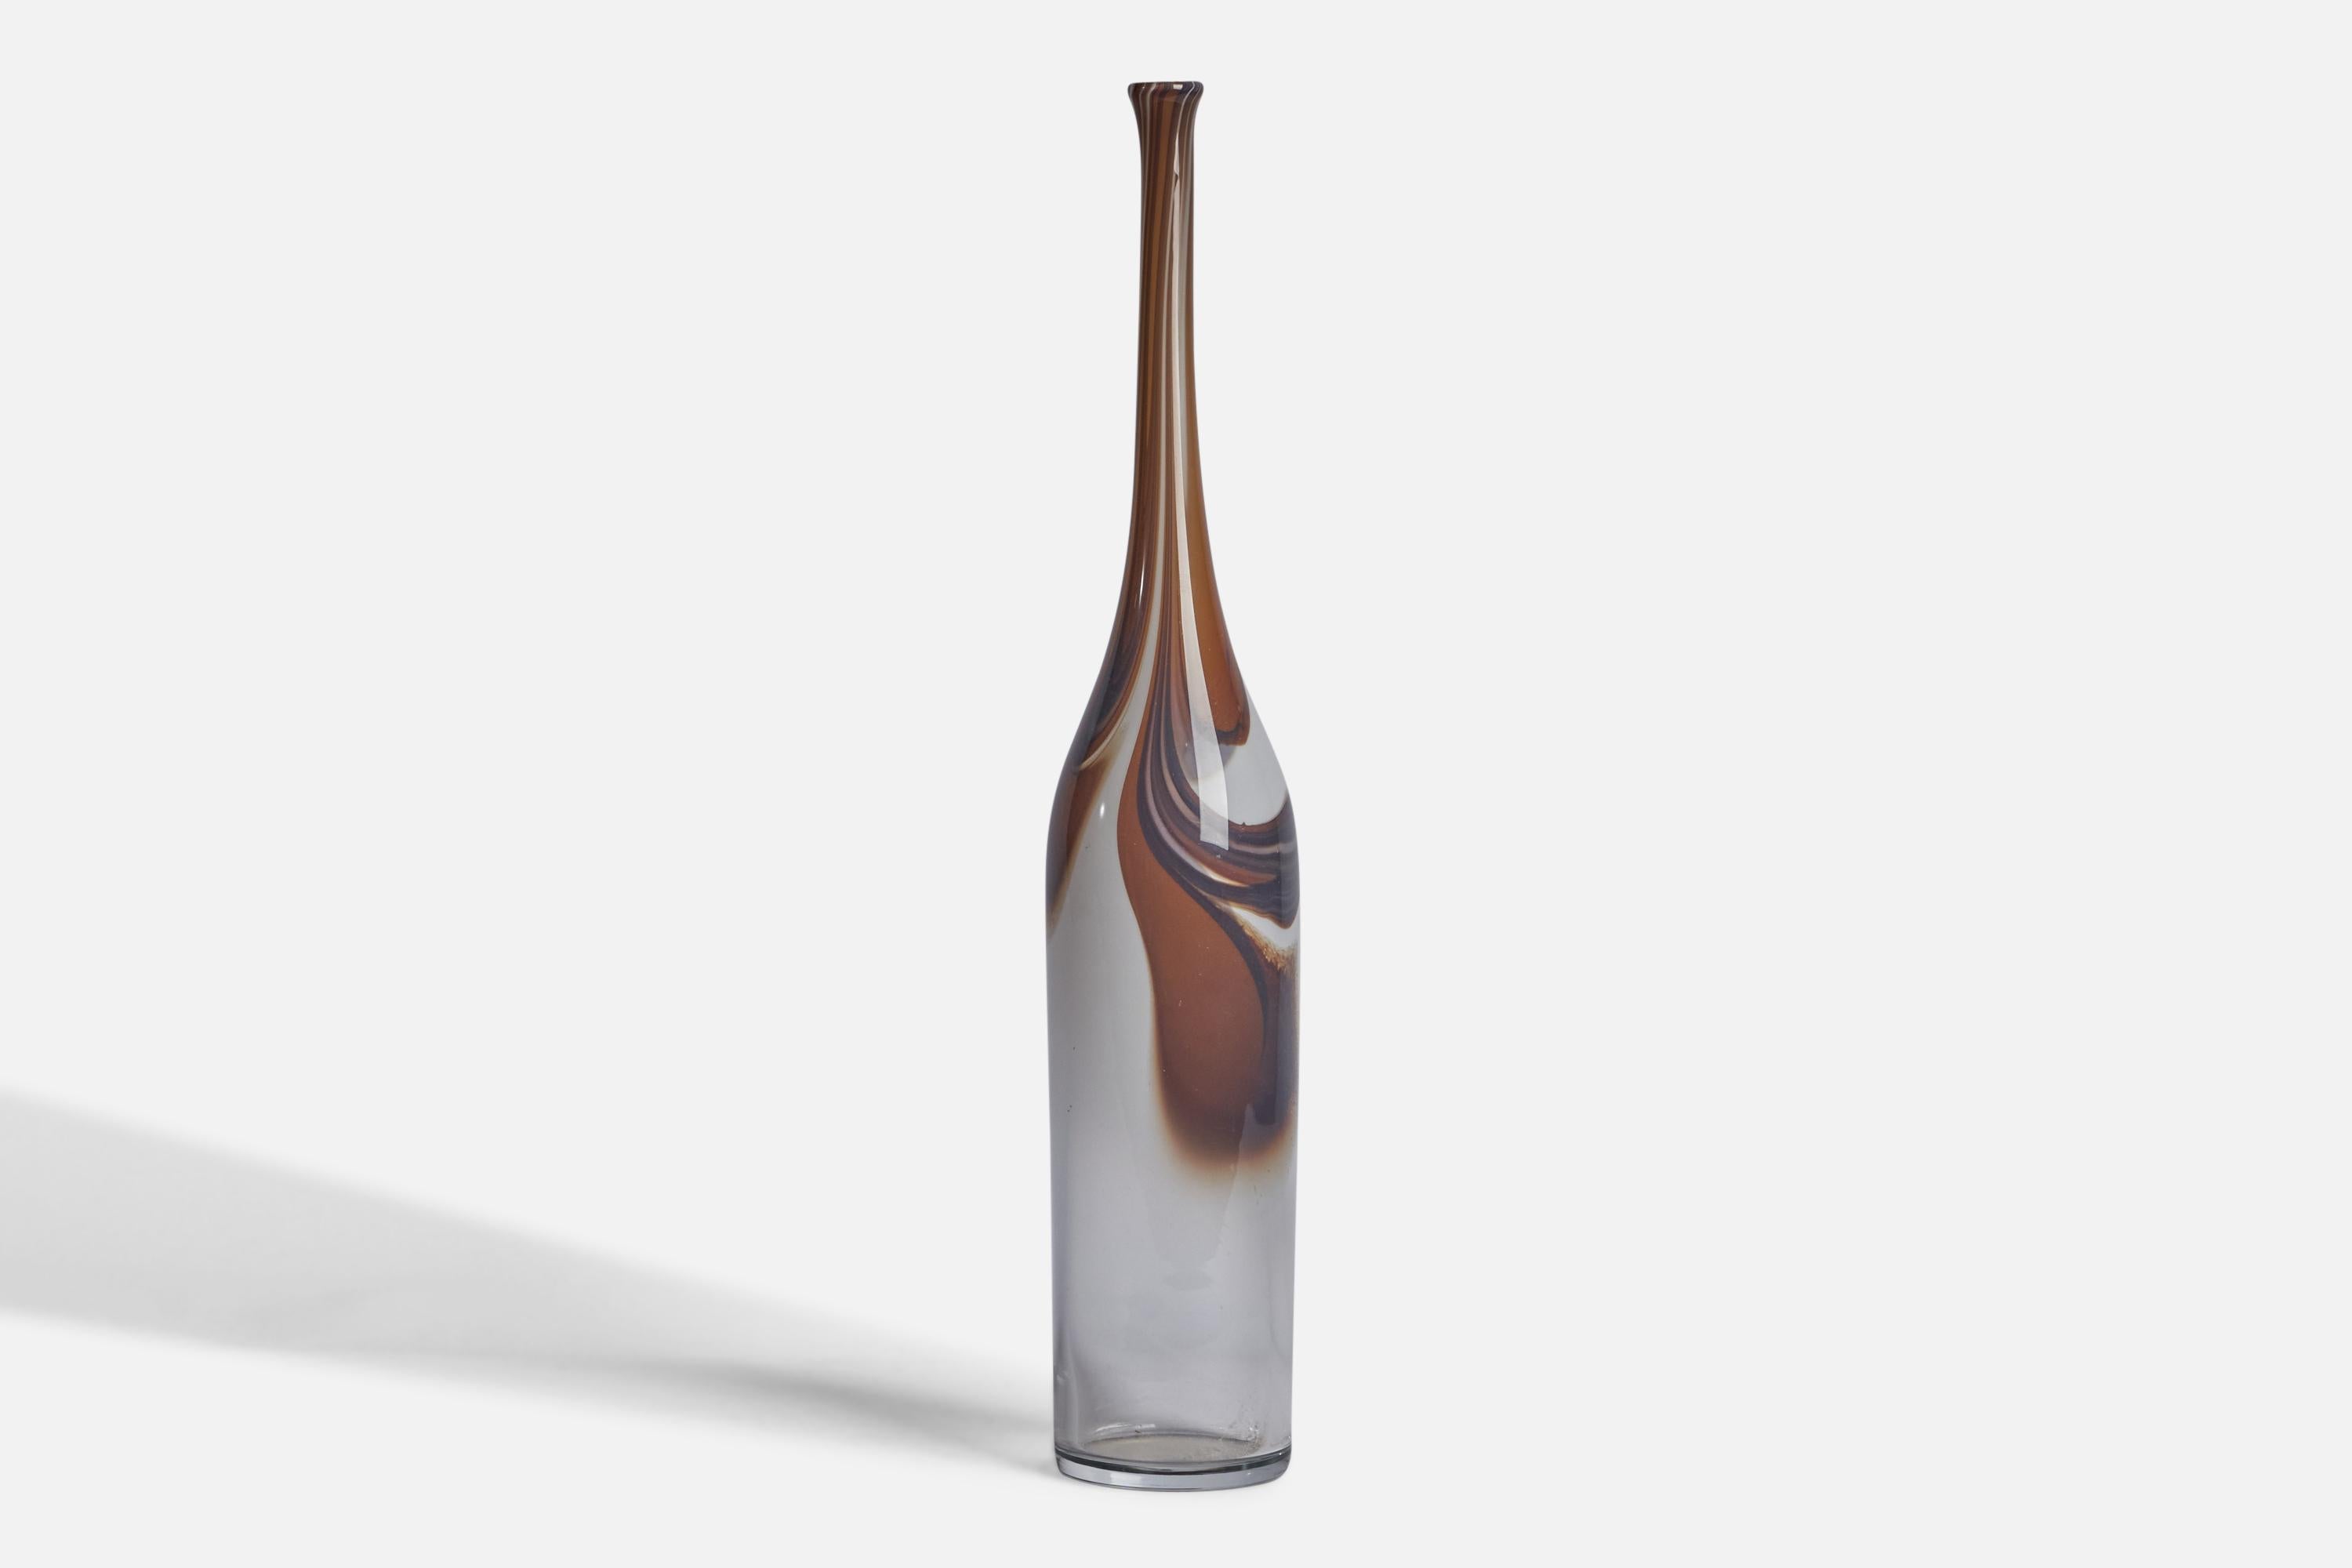 A brown and black-coloured blown glass vase designed by Bengt Orup and produced by Johansfors Glasbruk, Sweden, c. 1960s.